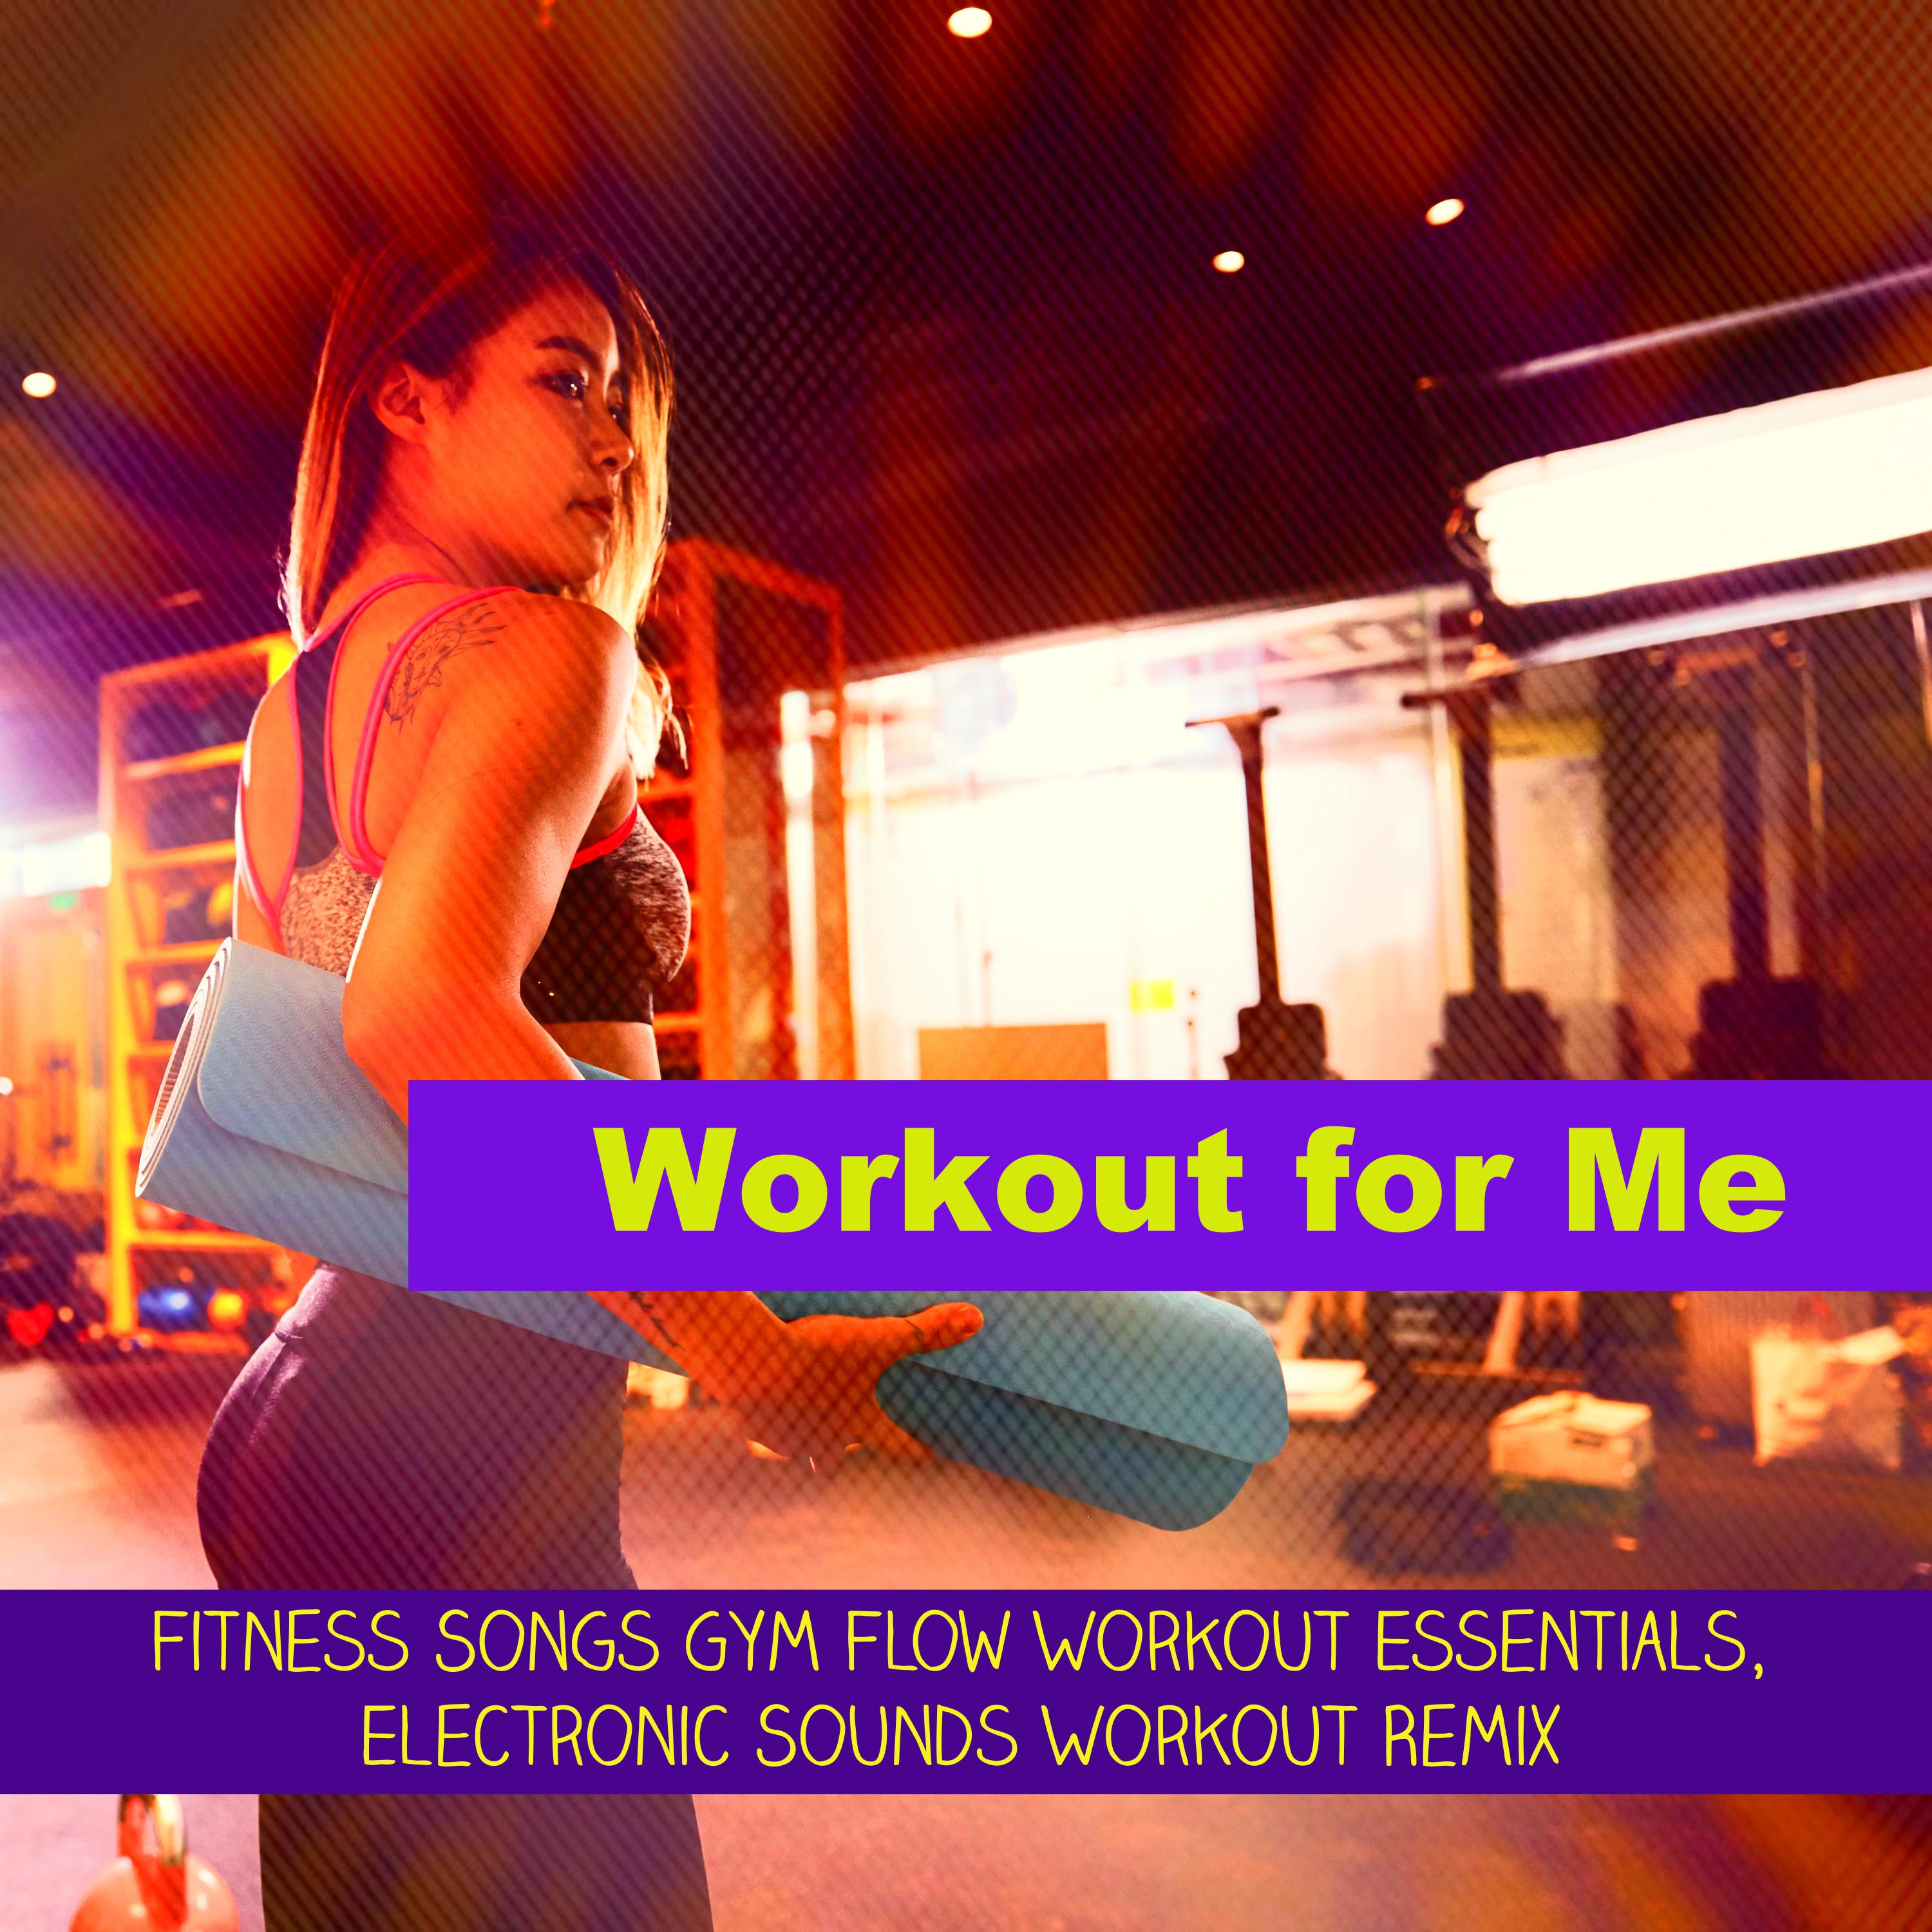 Workout for Me  Fitness Songs Gym Flow Workout Essentials, Electronic Sounds Workout Remix